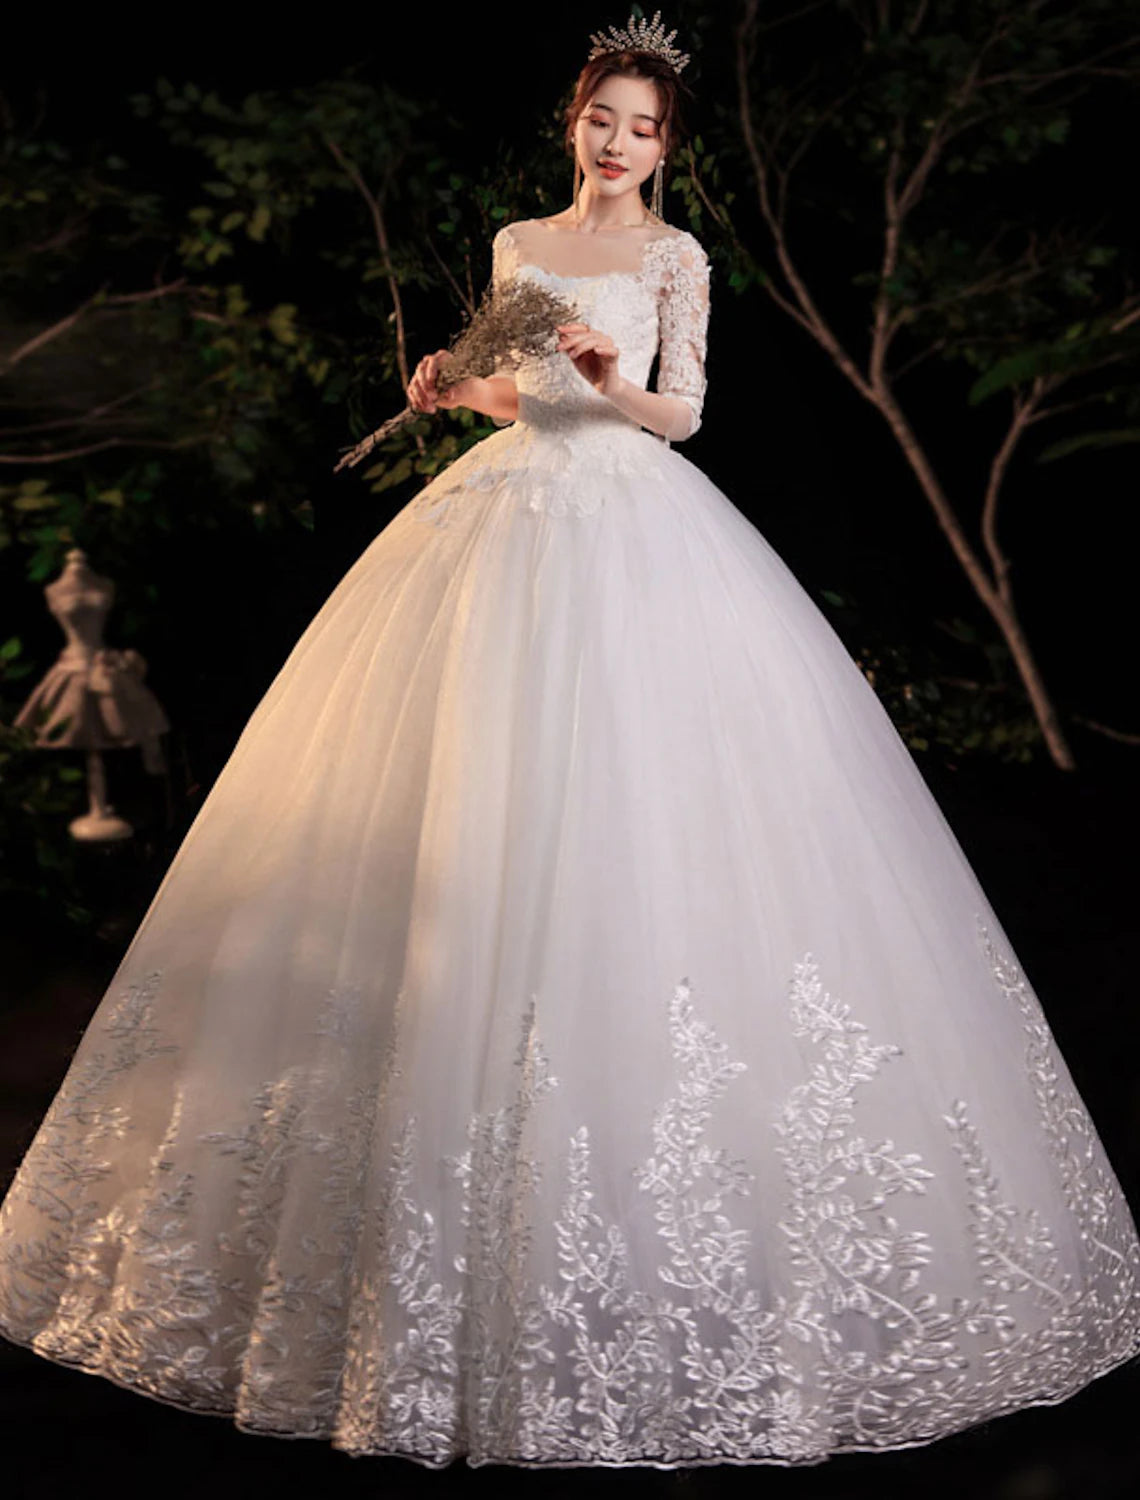 Reception Formal Wedding Dresses Ball Gown Illusion Neck Half Sleeve Floor Length Lace Bridal Gowns With Appliques Summer Wedding Party